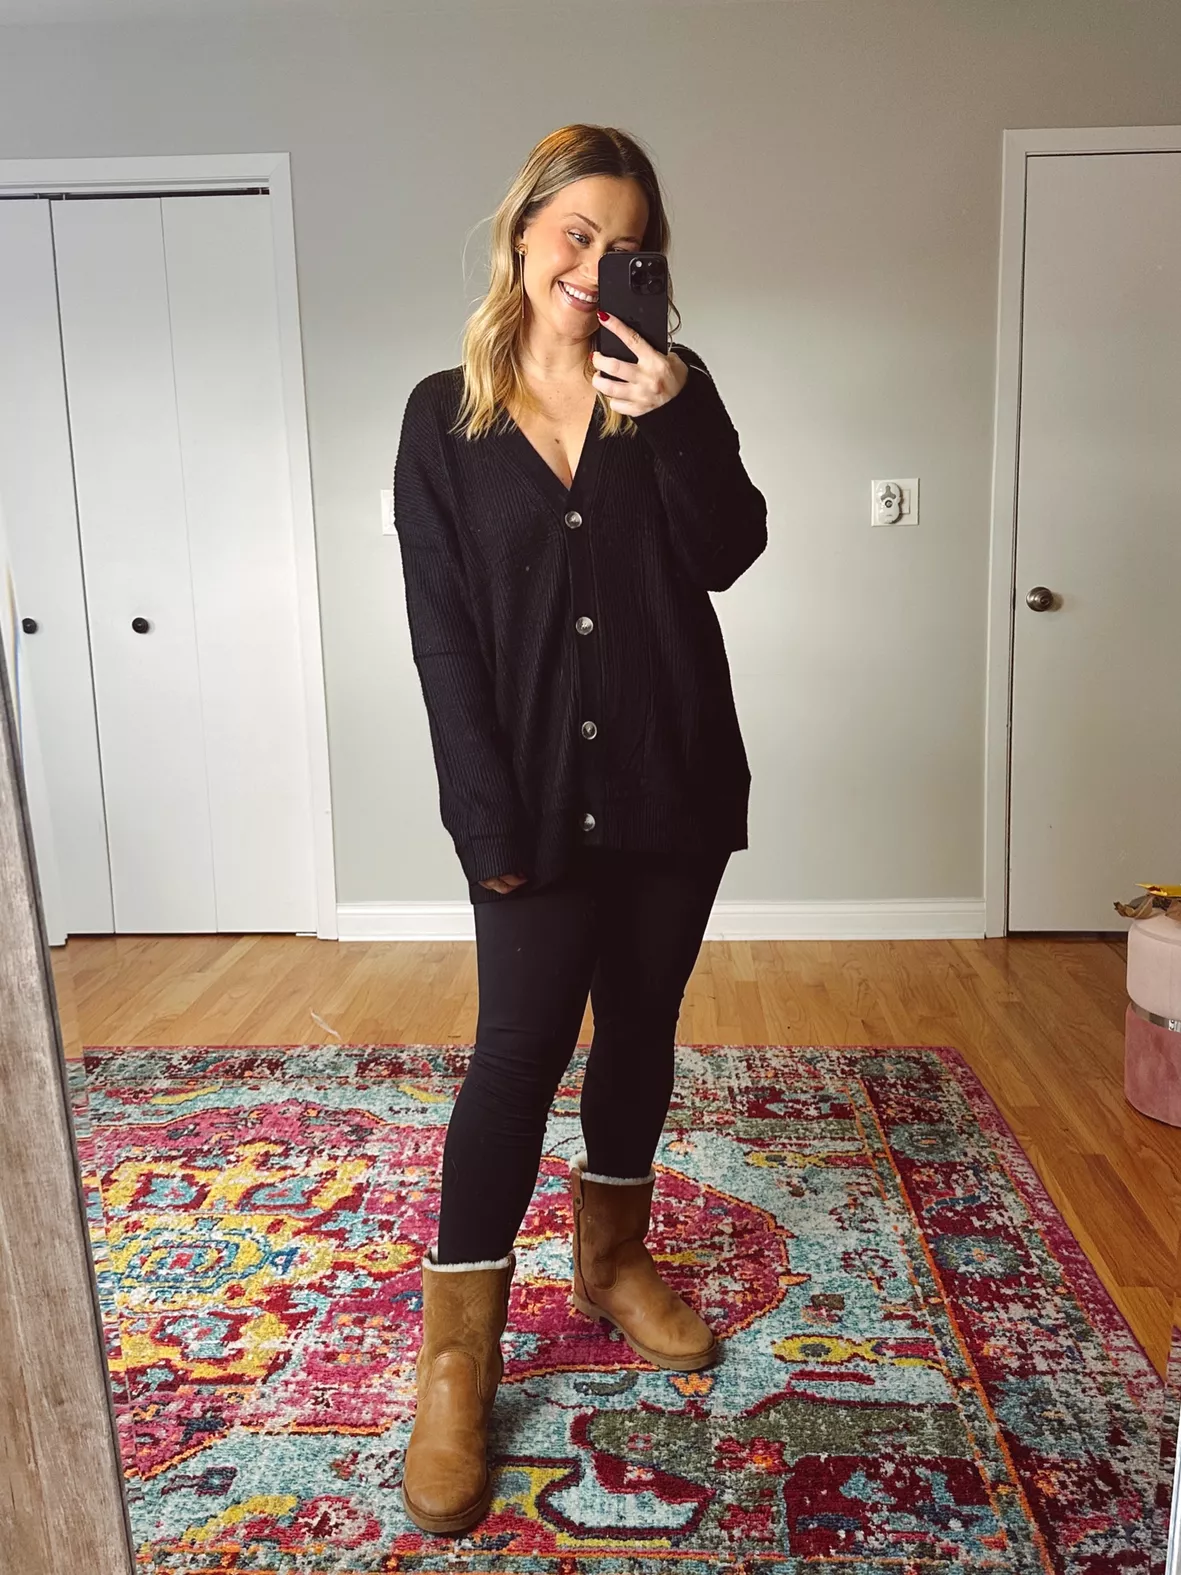 Comfortable look for winter with Ugg boots, black leggings, and